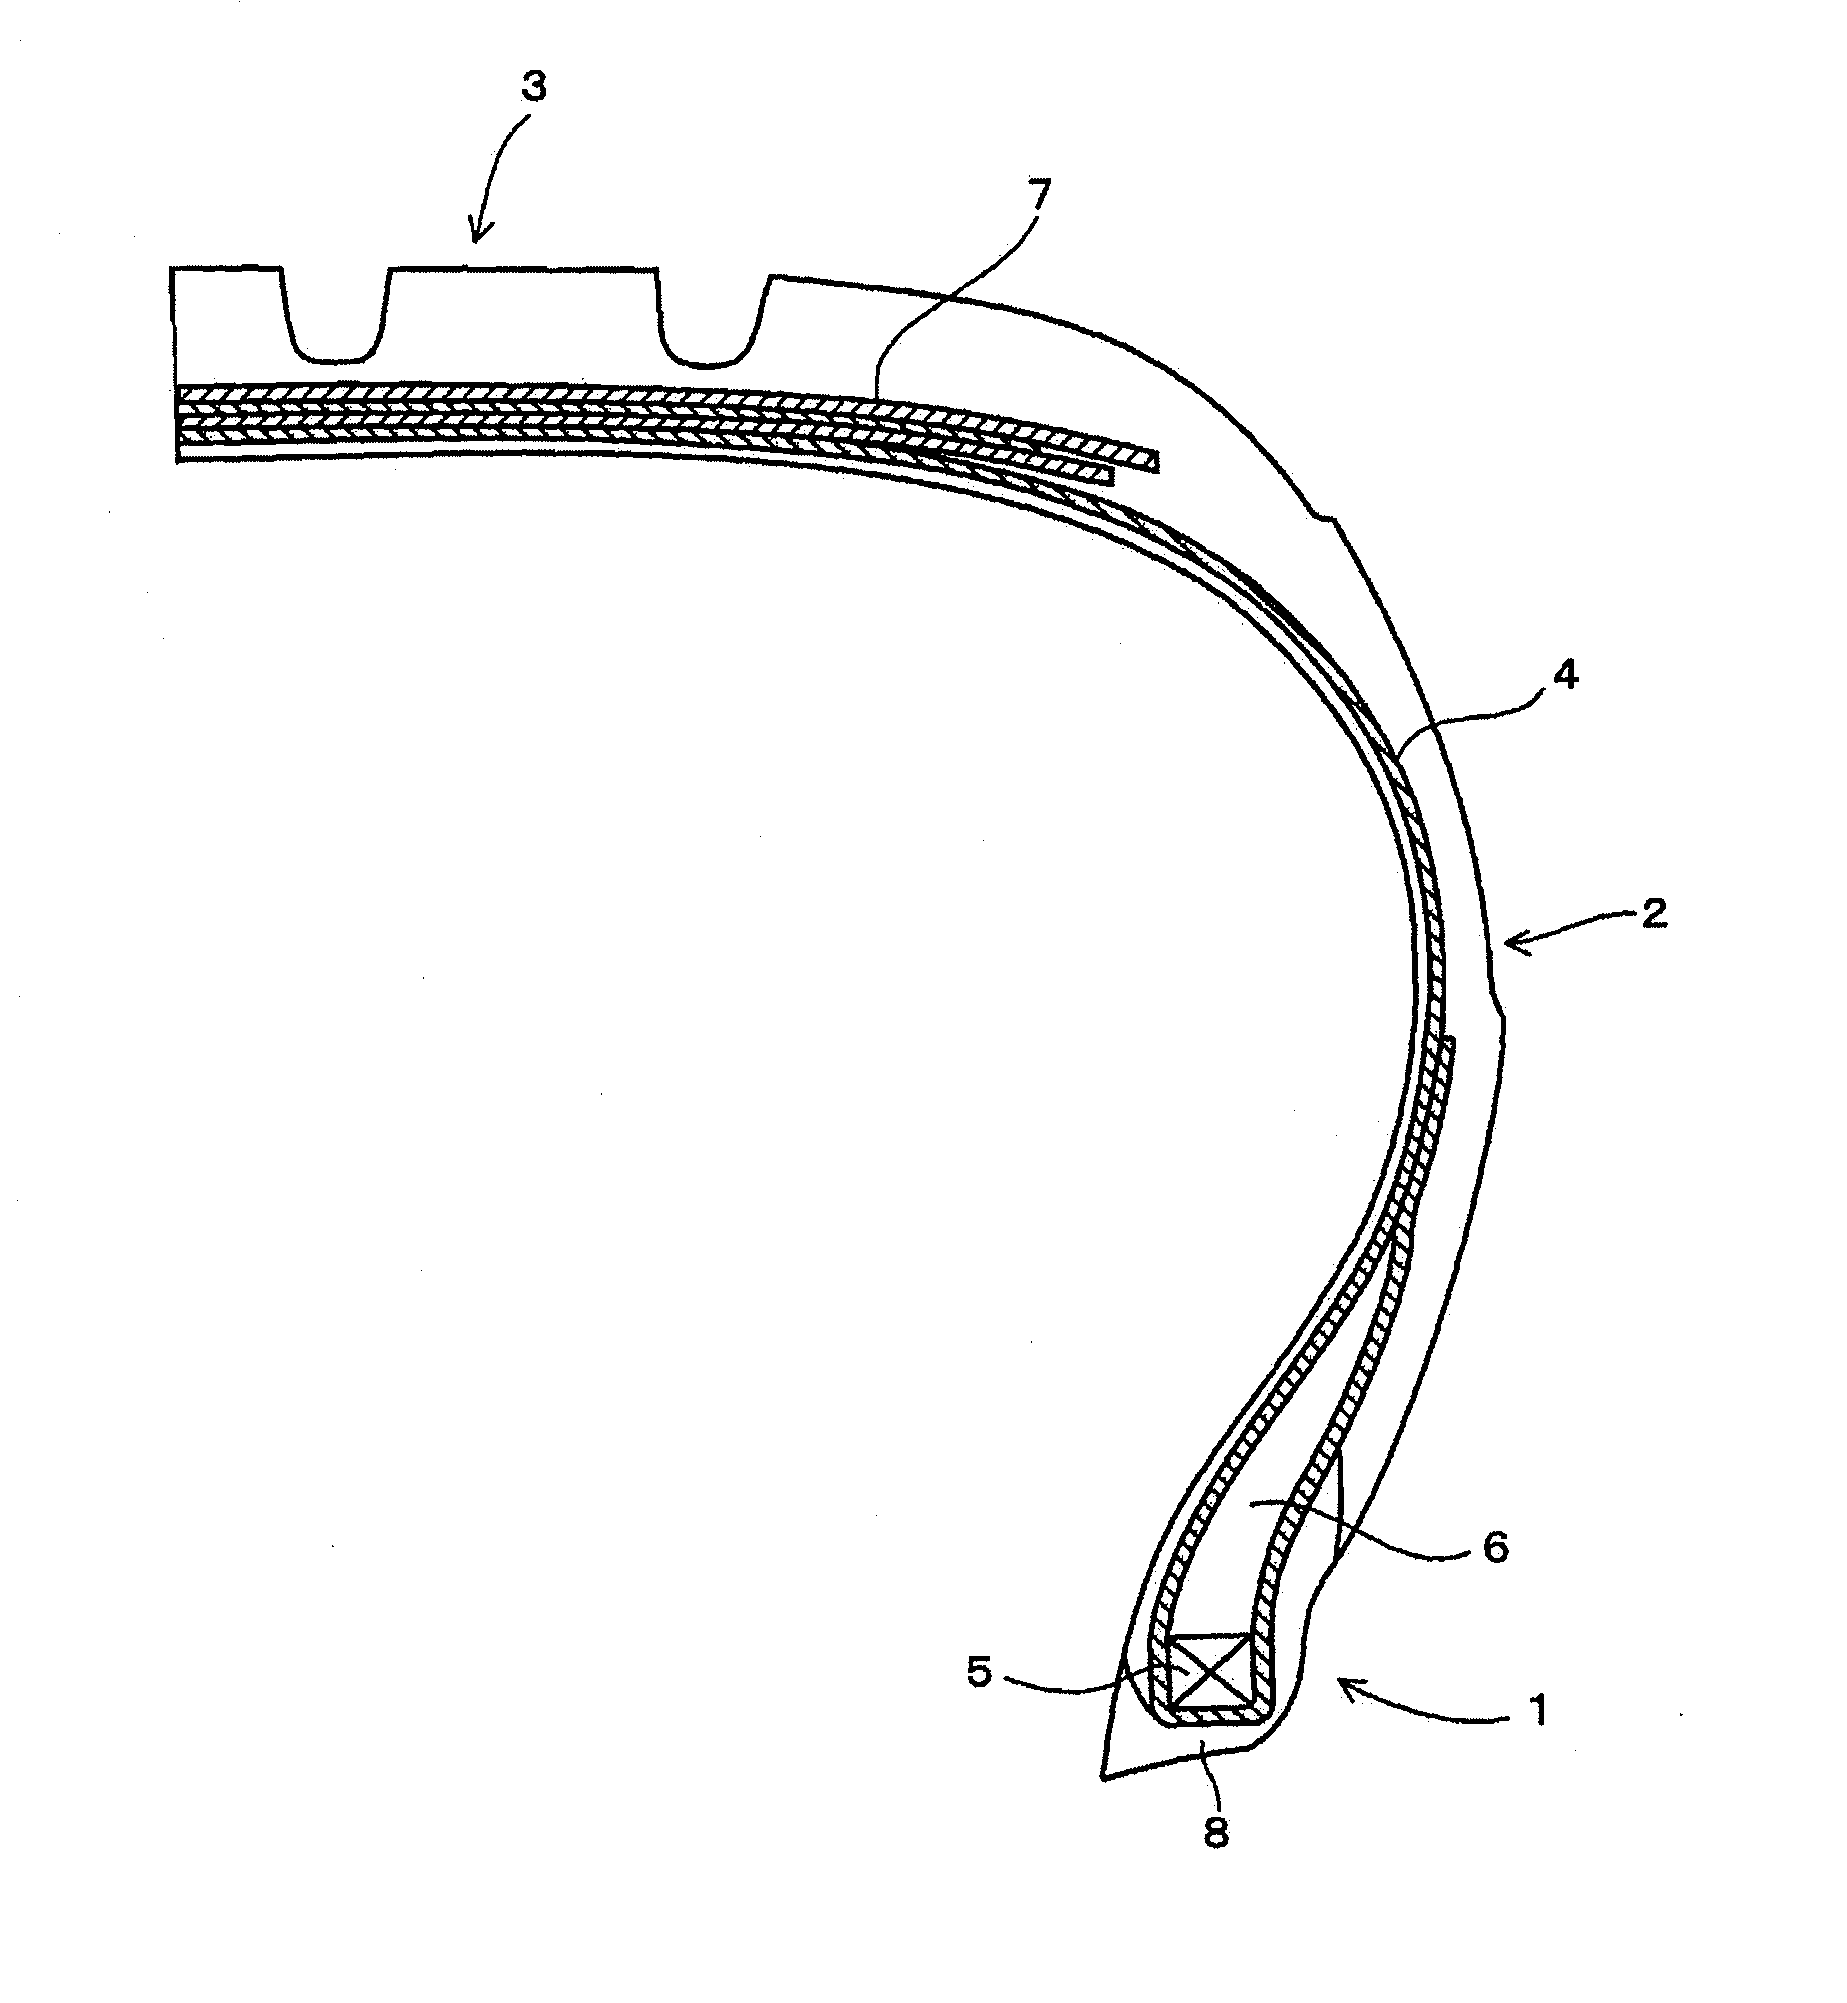 Rubber composition for use in tires